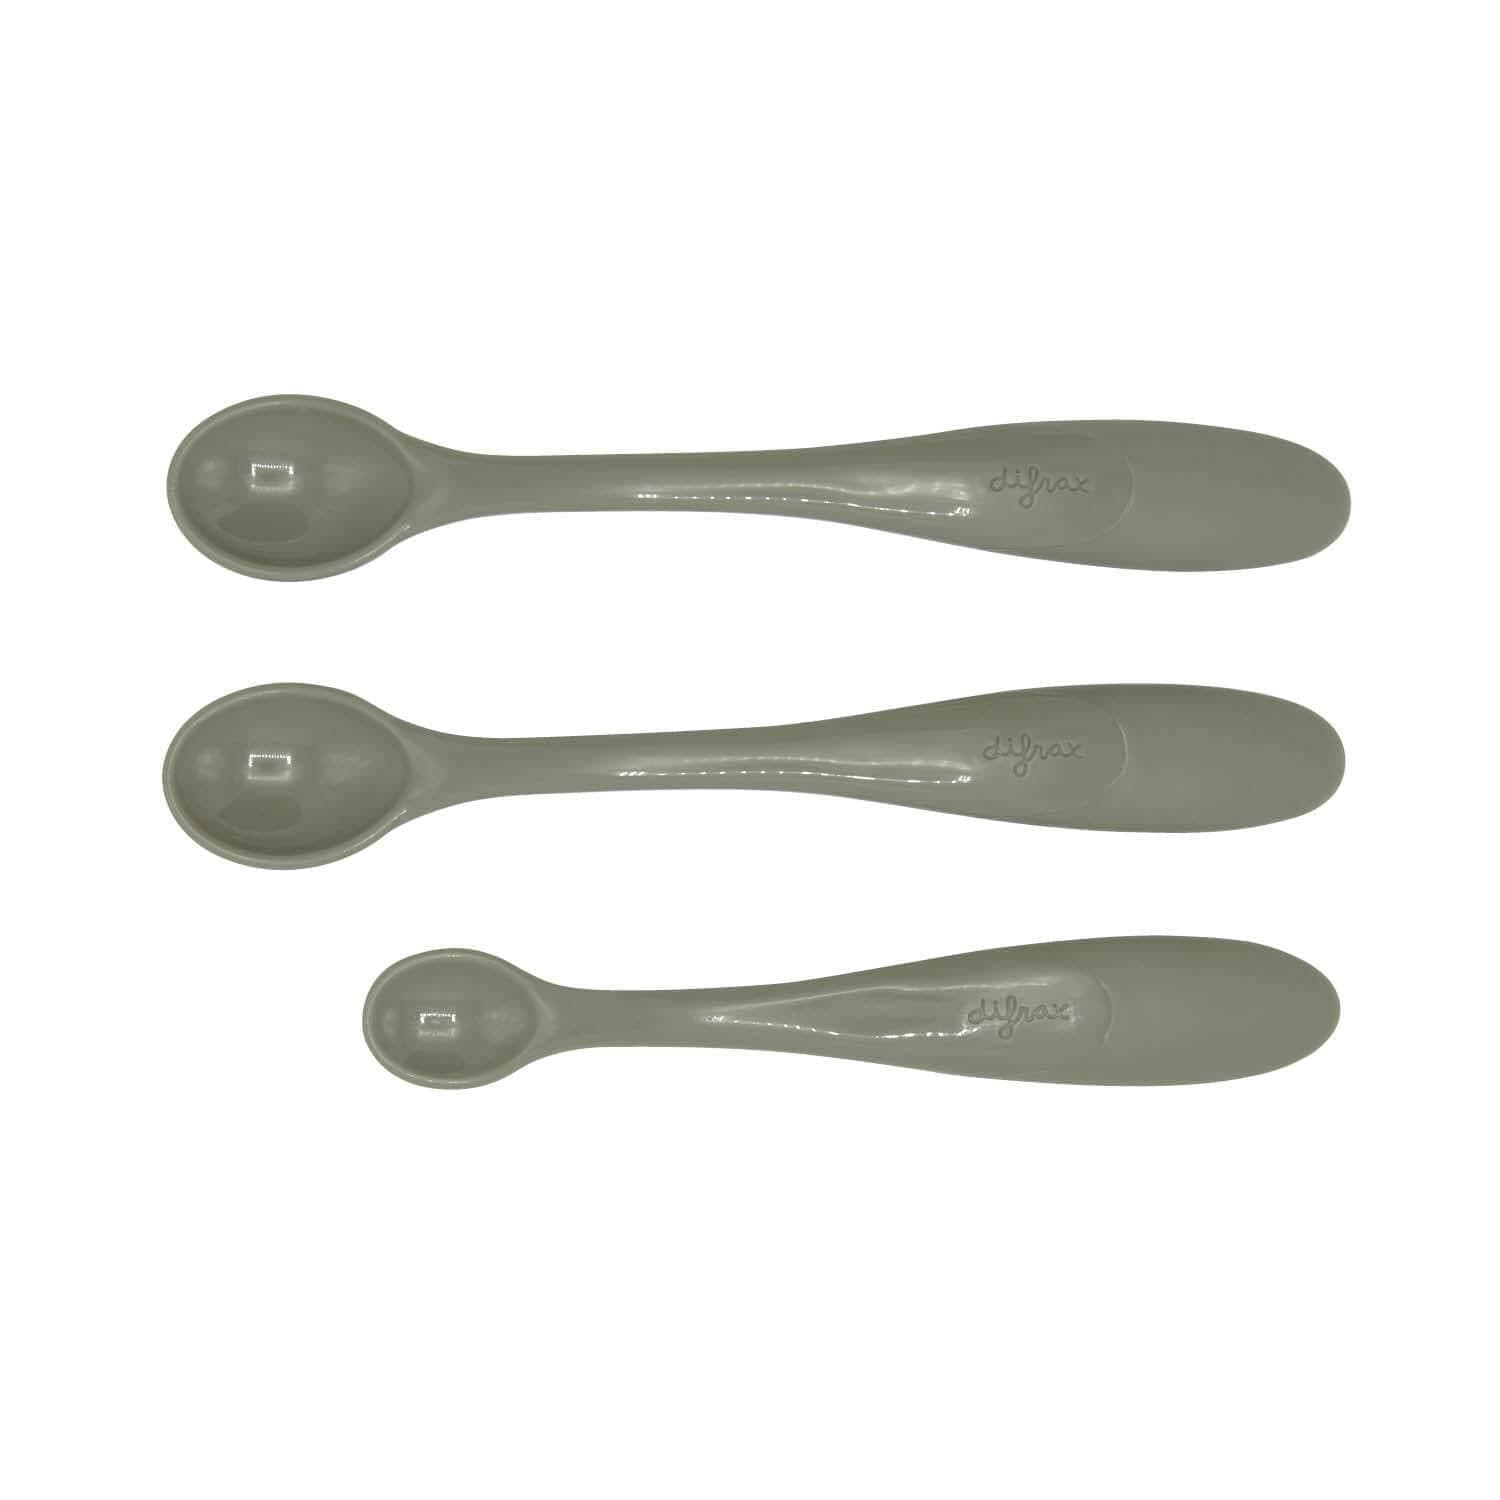 Weaning spoons for baby food